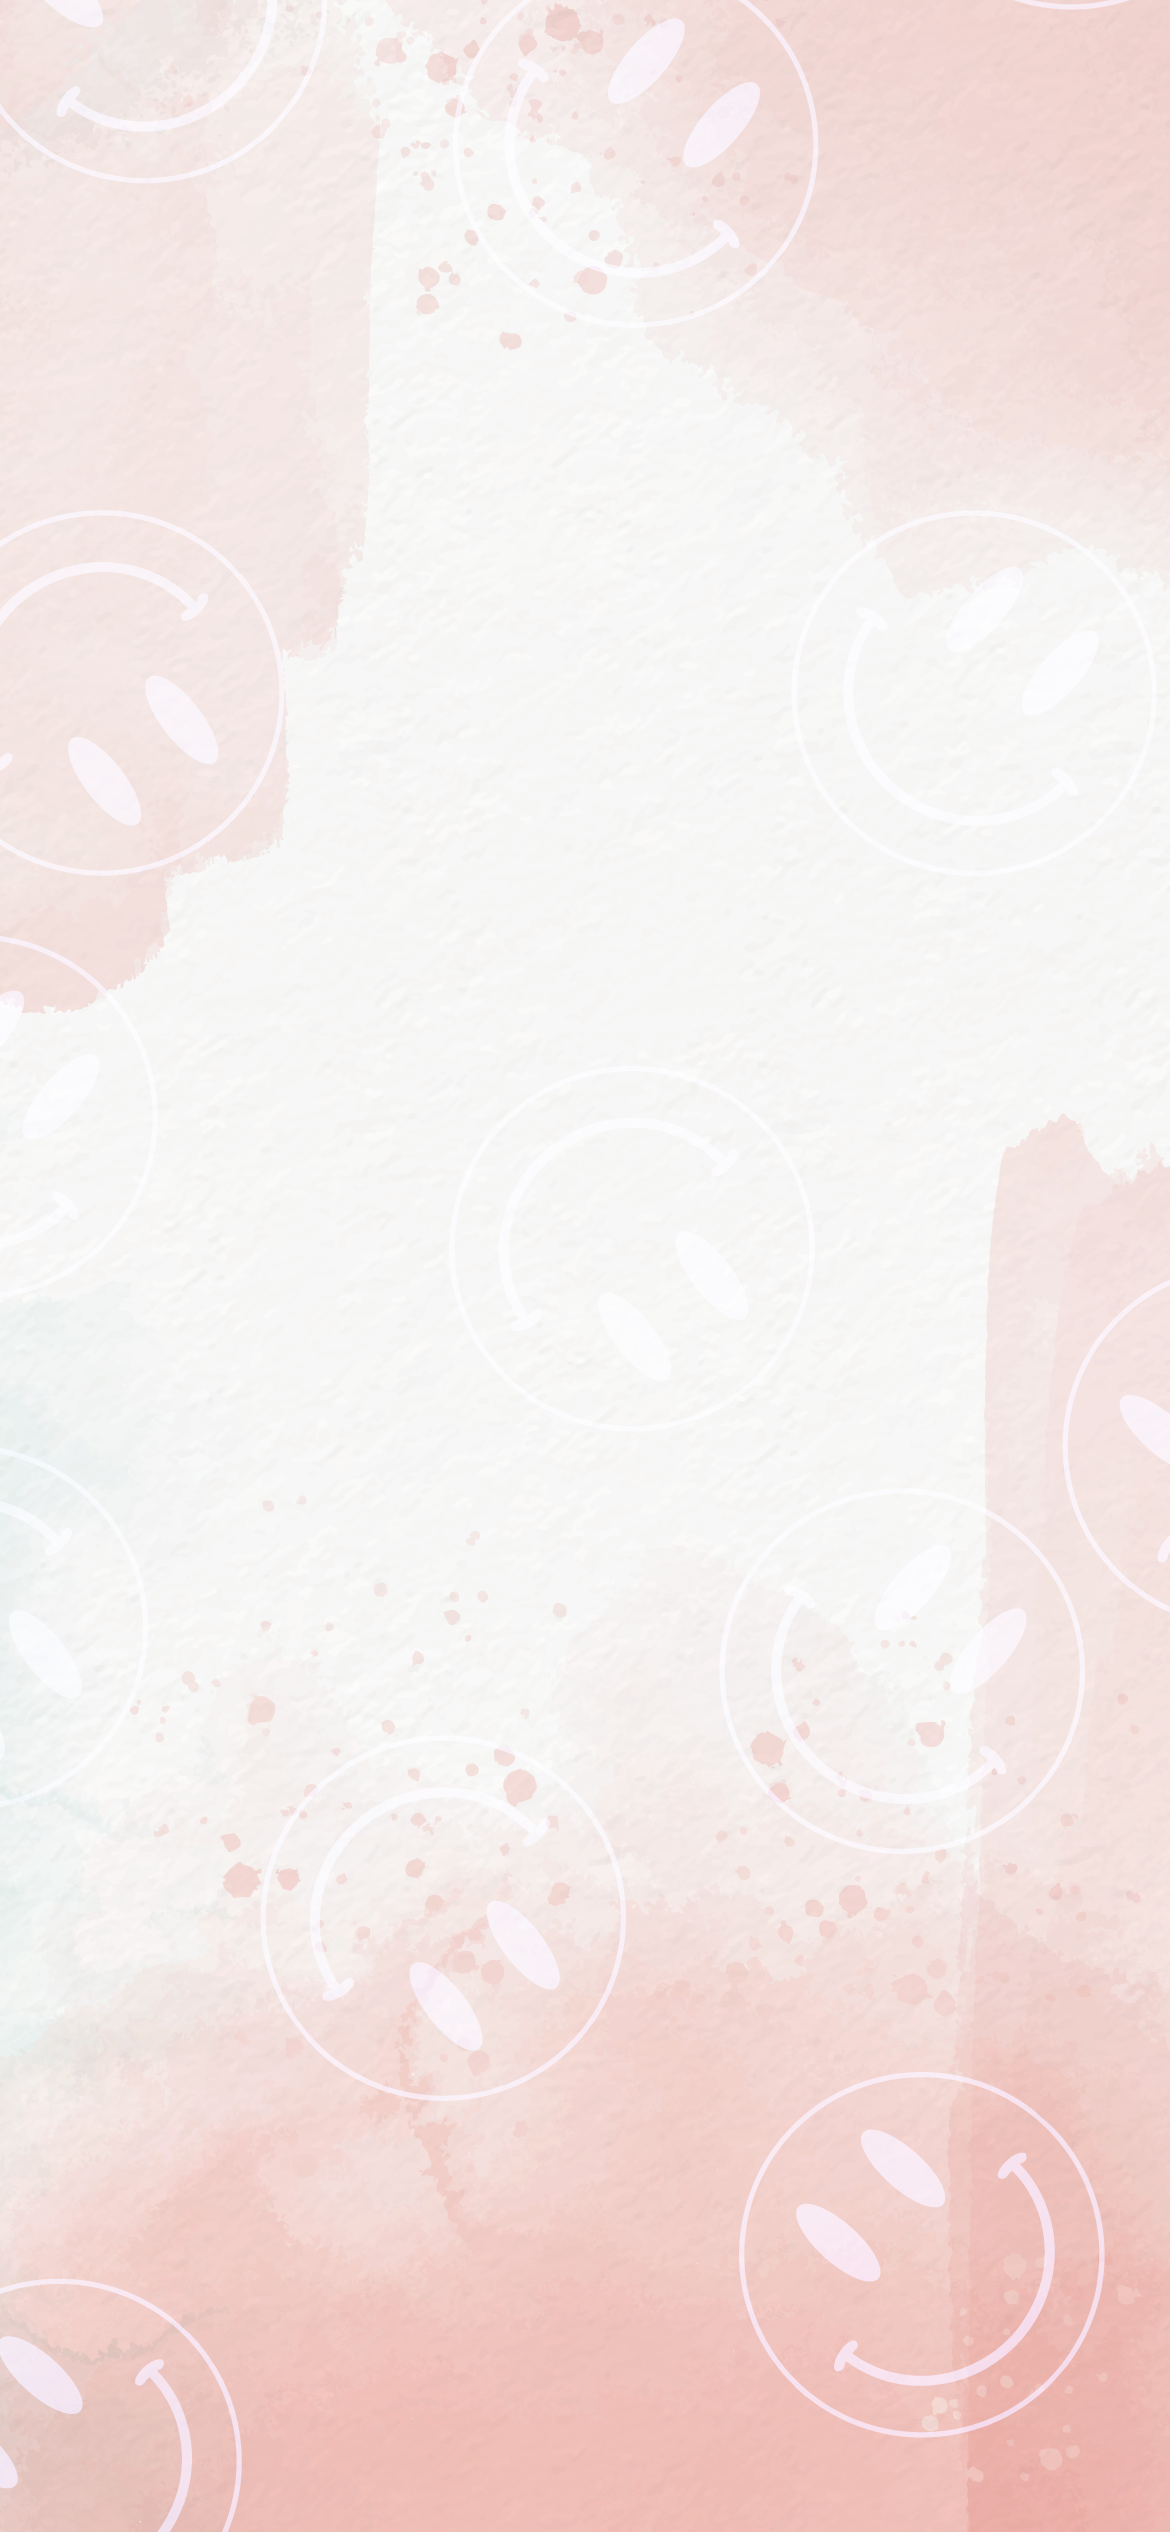 Download Dripping Pink Preppy Smiley Face Wallpaper  Wallpaperscom